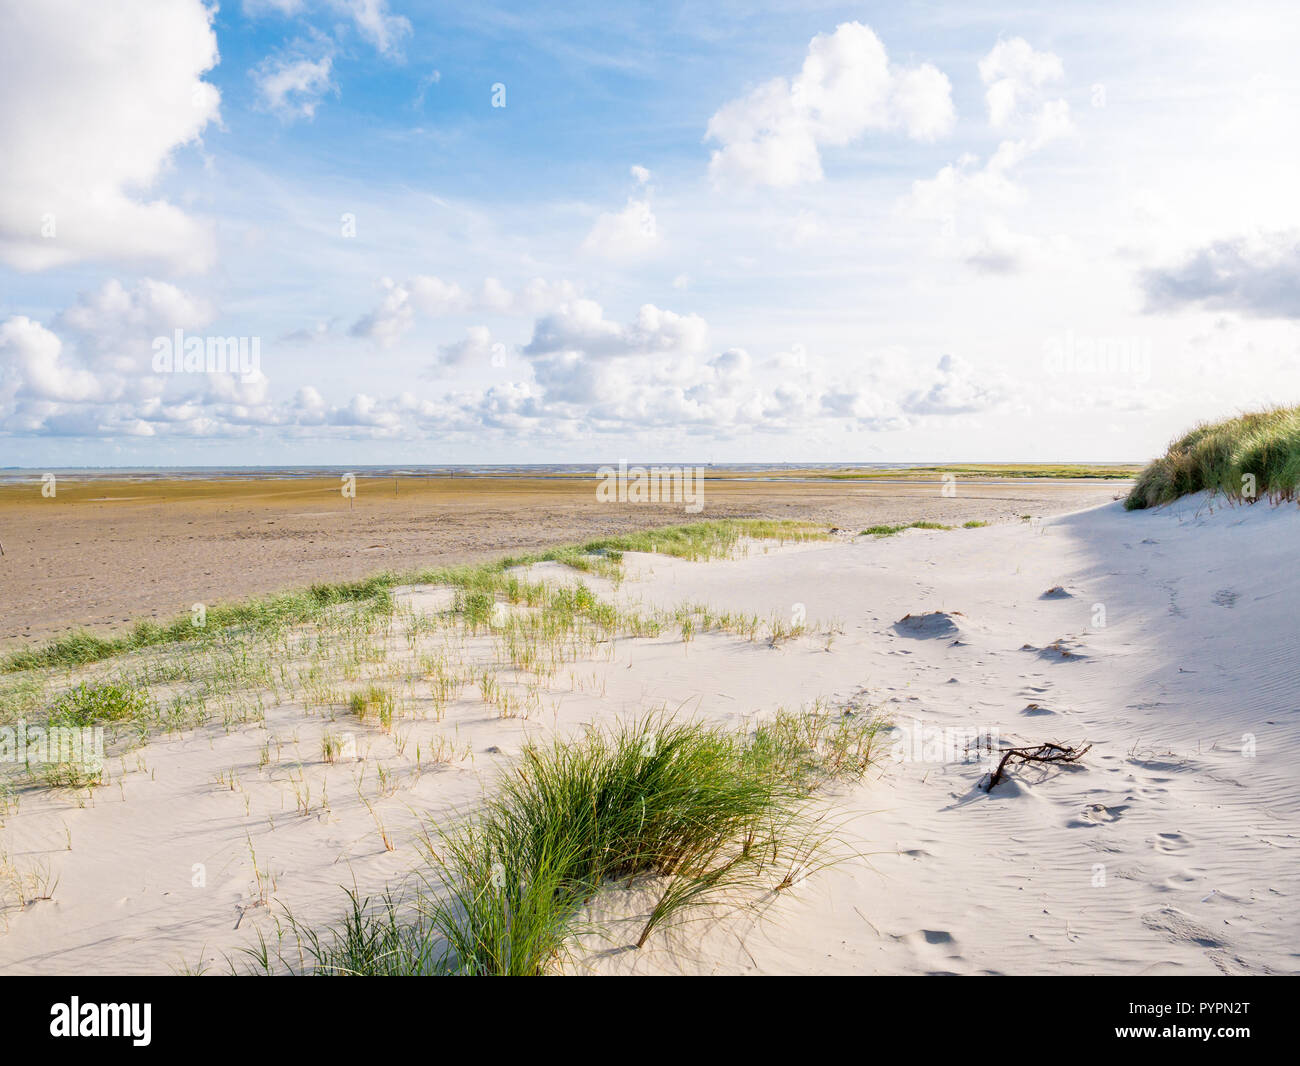 View to tidal flats of Wadden Sea at low tide from beach of nature reserve Boschplaat on Frisian island Terschelling, Netherlands Stock Photo